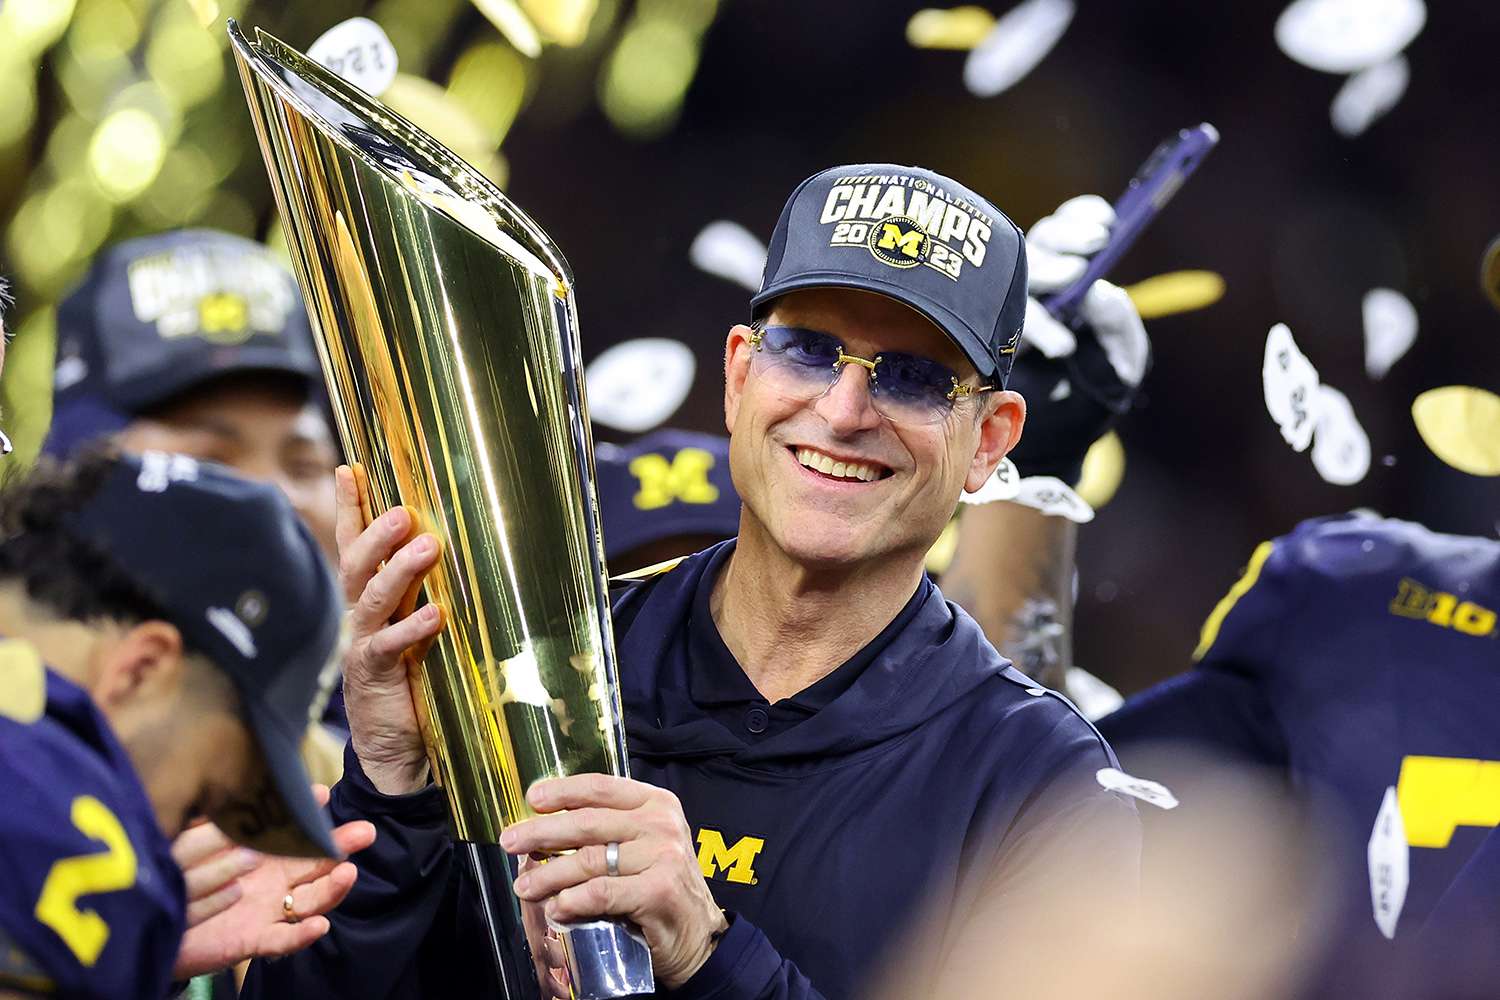 NFL News: Los Angeles Chargers’ NFL Draft Success with Jim Harbaugh’s Michigan Connection Signals Strategic Shift